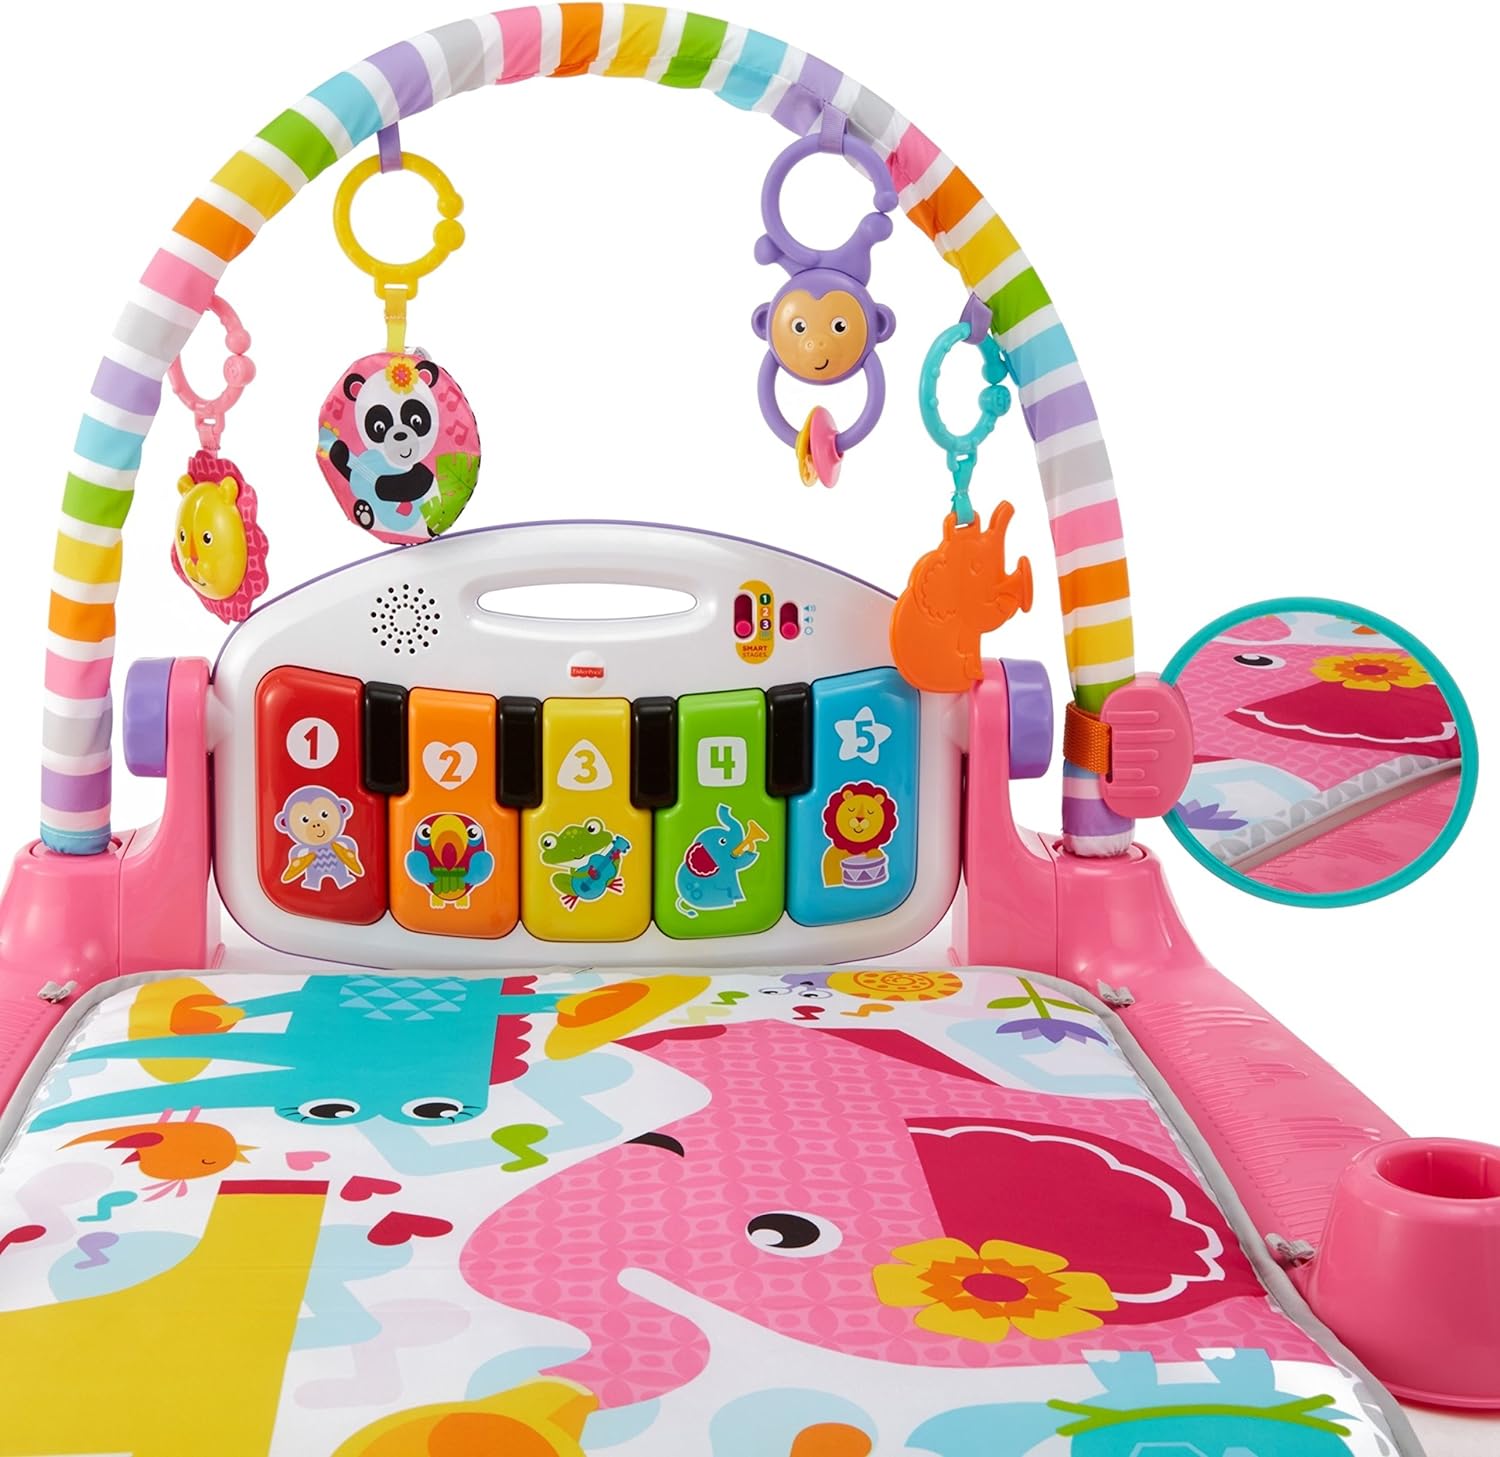 Fisher-Price Baby Playmat Deluxe Kick & Play Piano Gym With Musical -Toy  Lights & Smart Stages Learning Content For Newborn To Toddler, Pink